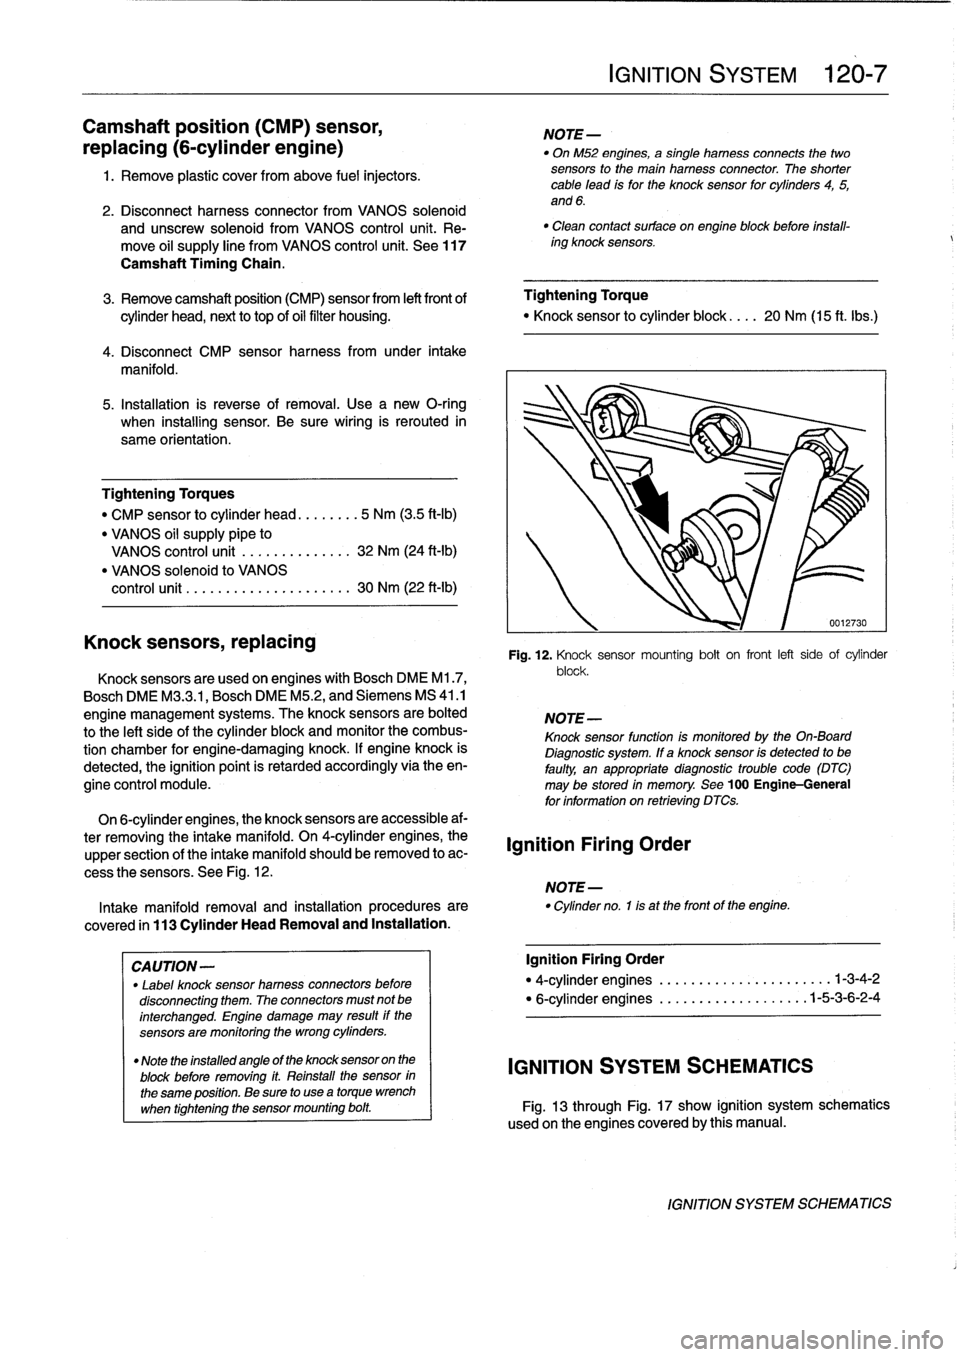 BMW 318i 1997 E36 User Guide 
Camshaft
position
(CMP)
sensor,

replacing
(6-cylinder
engine)

1
.
Remove
plastic
cover
from
above
fuel
injectors
.

2
.
Disconnect
harness
connector
from
VANOS
solenoid

and
unscrew
solenoid
from
V